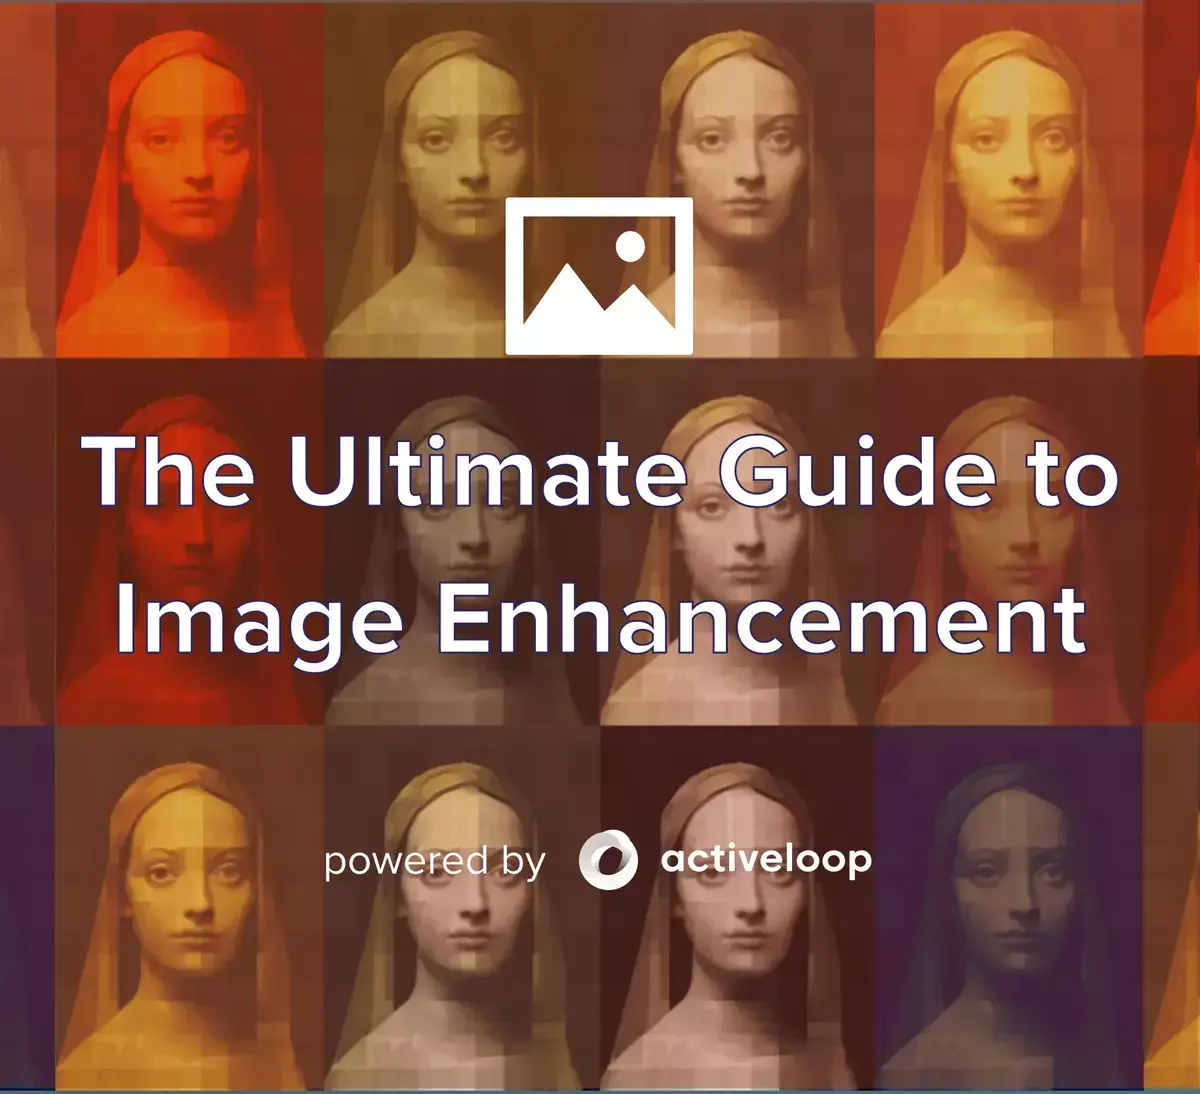 Image Enhancement in Machine Learning: the Ultimate Guide